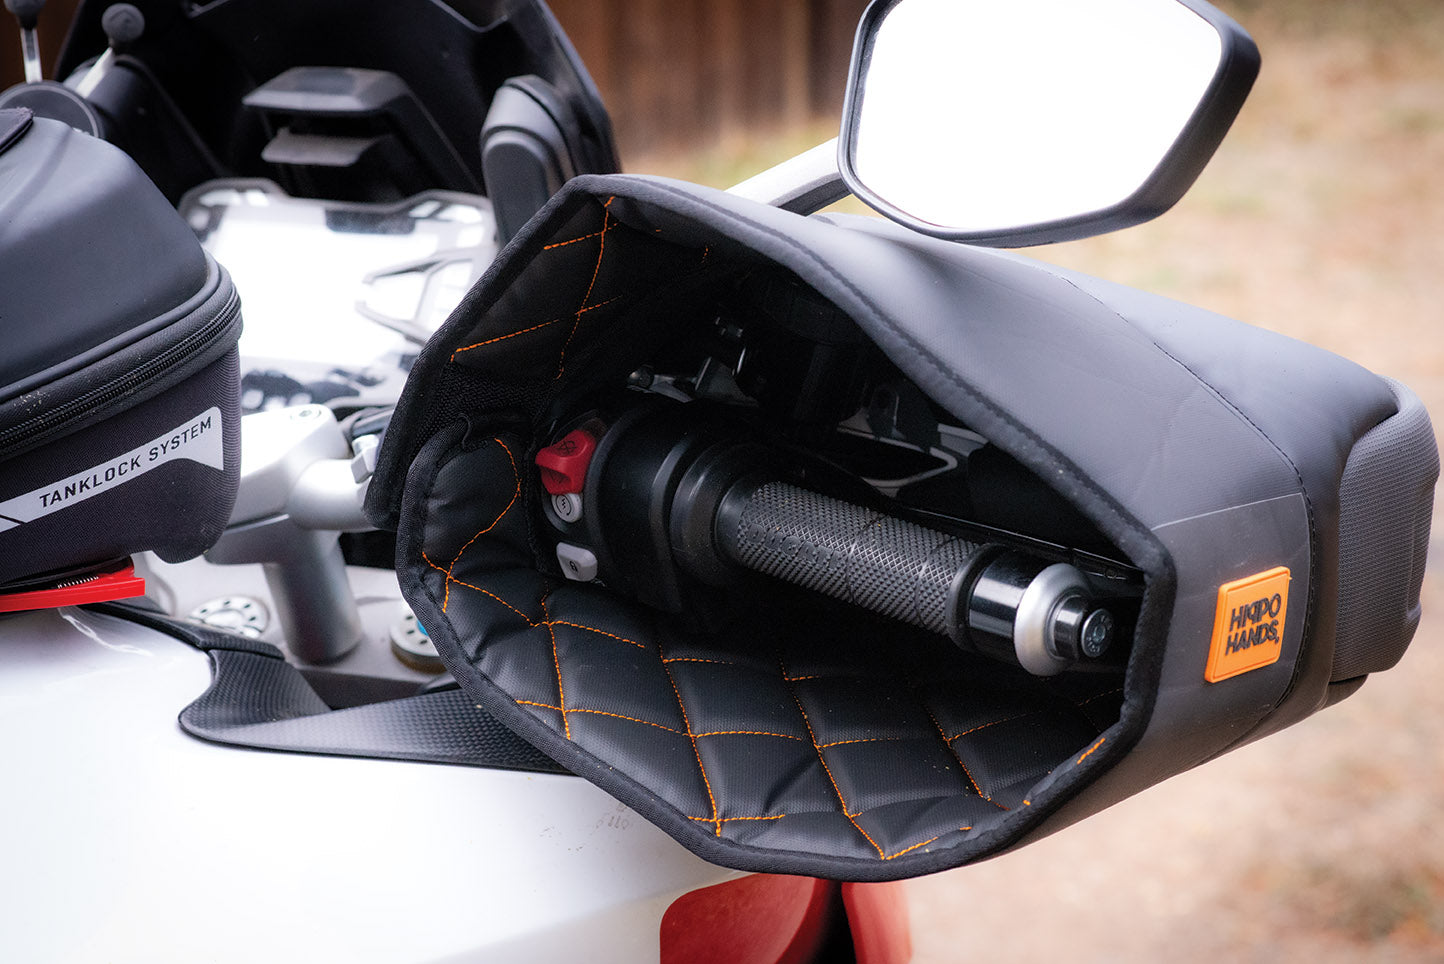 Rogue — Mid-sized, versatile motorcycle hand covers